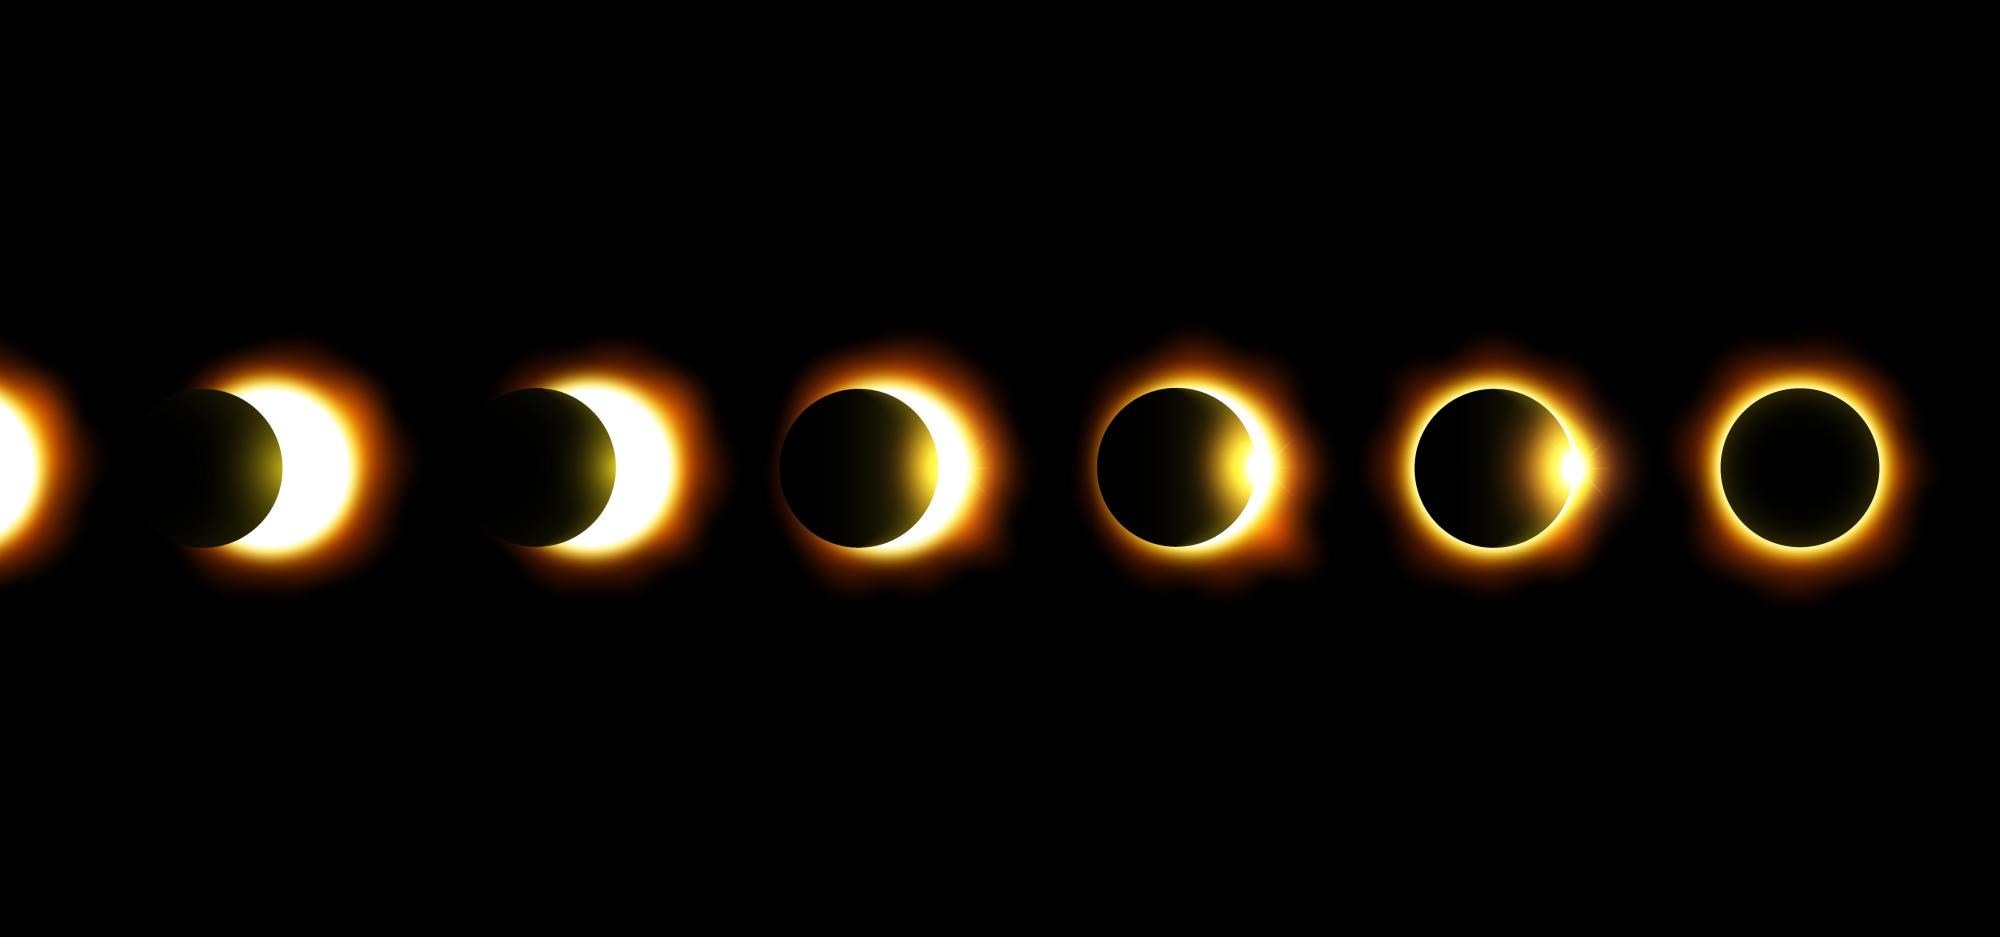 Adobe stock image of the stages of an eclipse